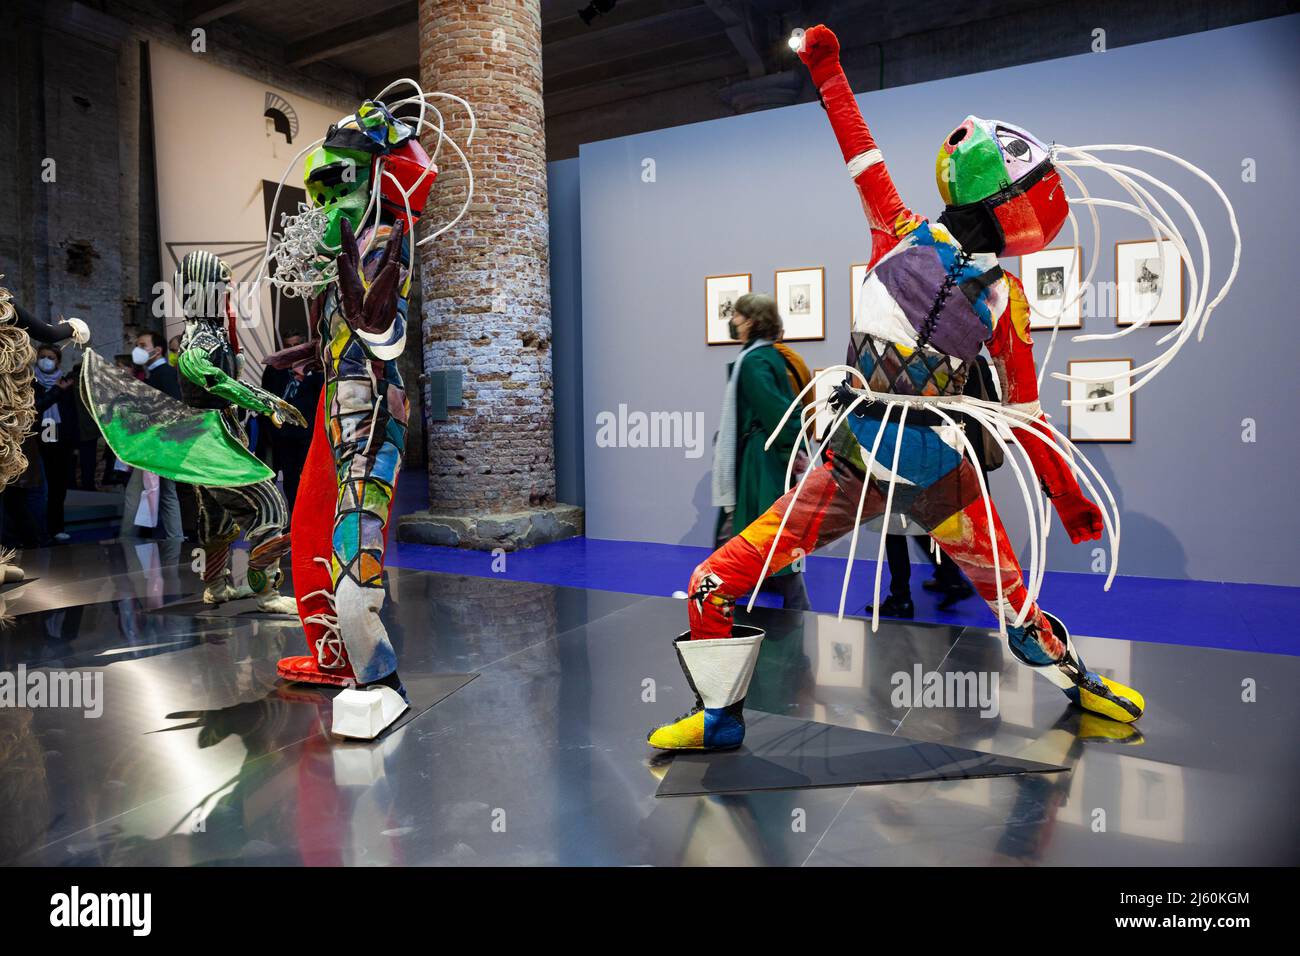 Venice, Italy - April 20: Installation titled Weimar-era costumes by Lavinia Schulz and Walter Holdt at the 59th International Art exhibition of Venic Stock Photo